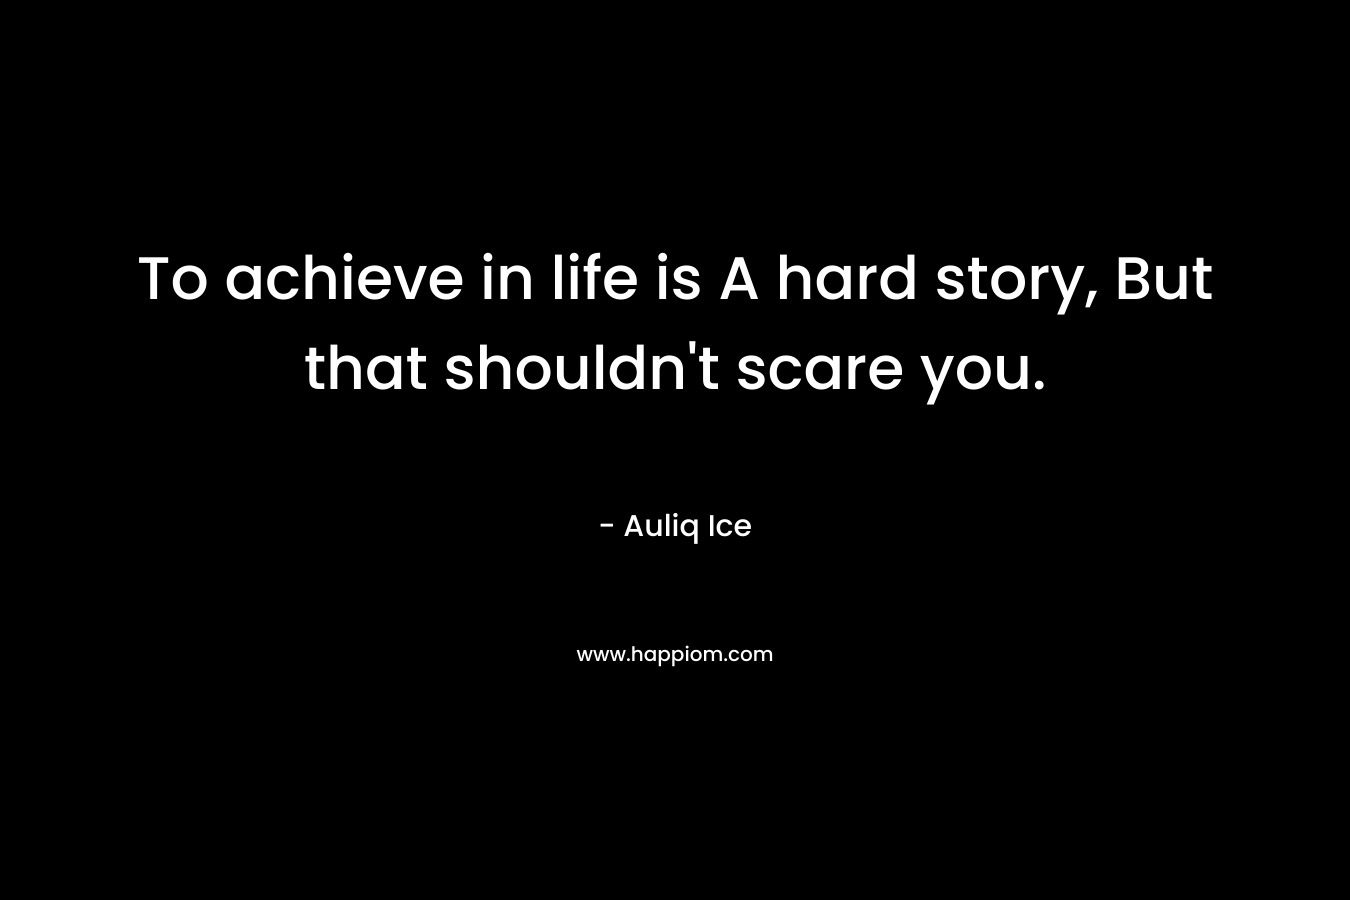 To achieve in life is A hard story, But that shouldn’t scare you. – Auliq Ice